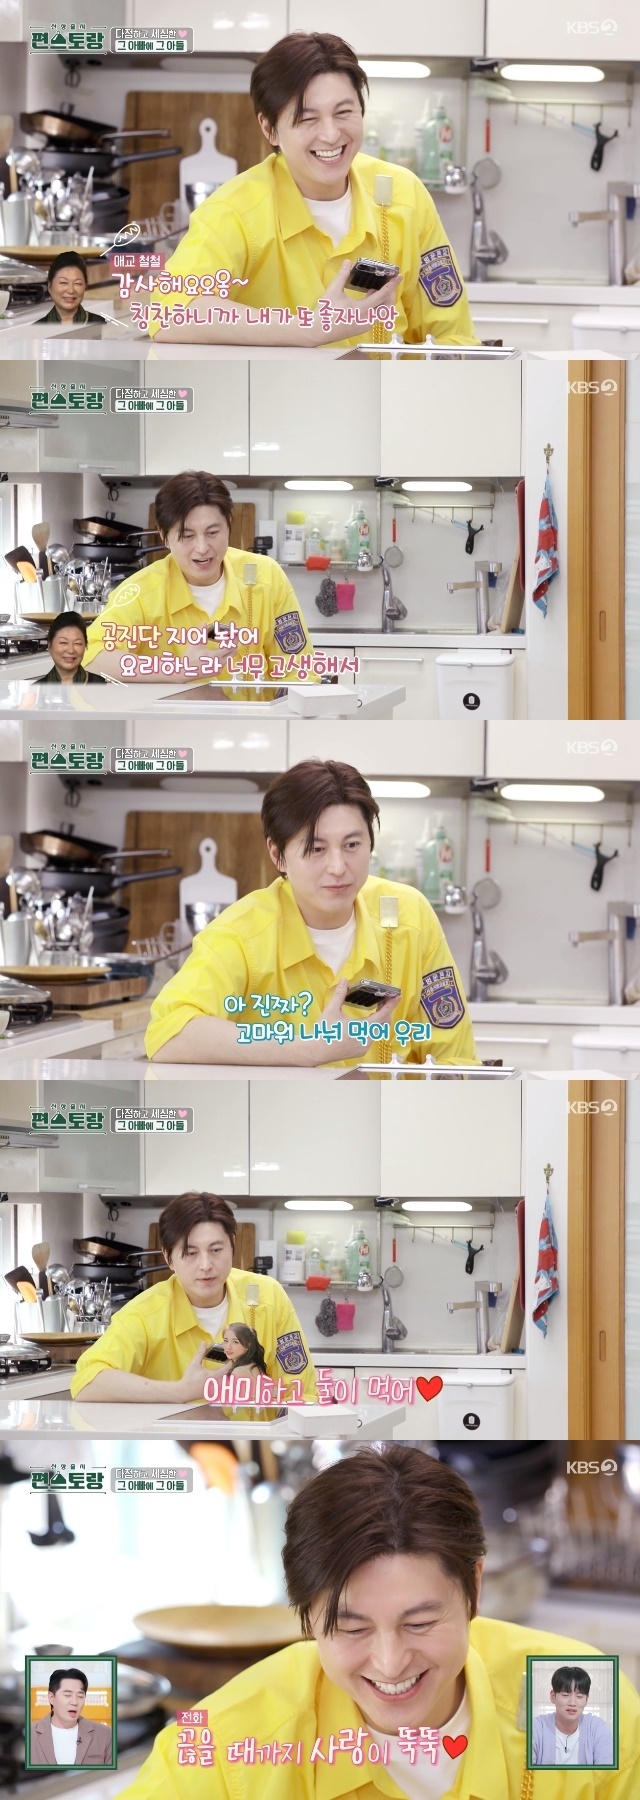 Ryu Soo-youngs mother showed daughter-in-law loveRyu Soo-young made a phone call with his parents in the 180th episode of KBS 2TVs entertainment show Stars Top Recipe at Fun-Staurant (hereinafter referred to as Stars Top Recipe at Fun-Staurant) aired on June 16.On this day, Ryu Soo-youngs mother interrupted the conversation when Ryu Soo-young was talking to his father on the phone.Mother, who praised her sons cooking skills, saying, Its good to have a piggyback yesterday, thanked Ryu Soo-young for his charming voice when he learned that he had learned Maiyar from his mother.The mother then said, I built the water for Ryu Soo-young, who is struggling to cook.The Mother said, Ami and share it, and Daughter-in-law Park Ha-sun also took care of it.